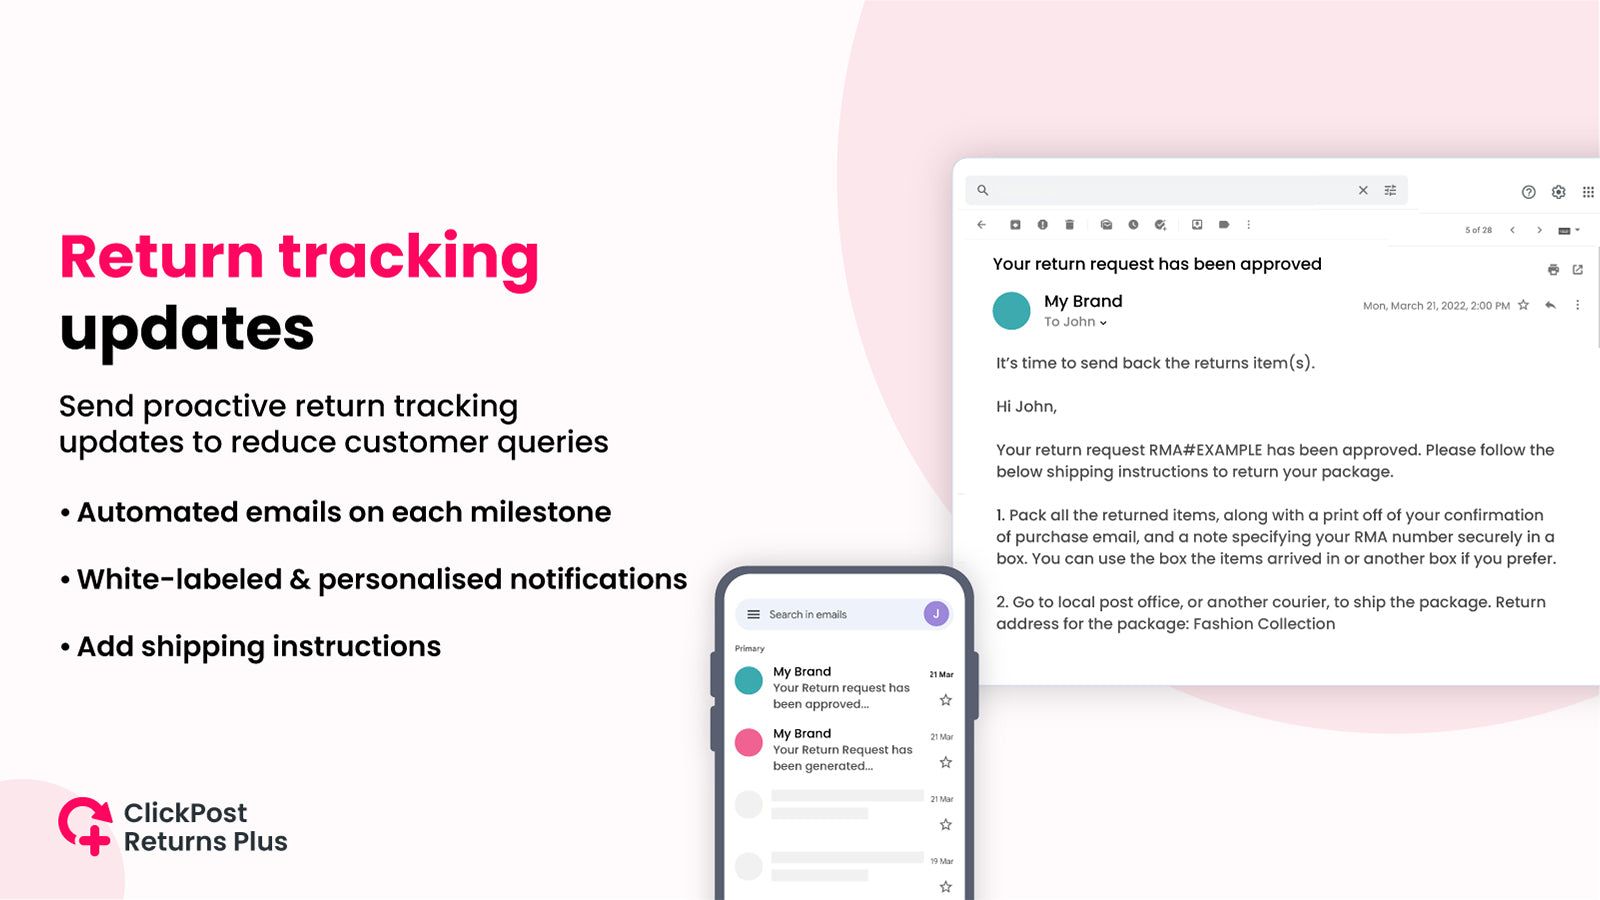 Email notifications to customers for tracking of return requests